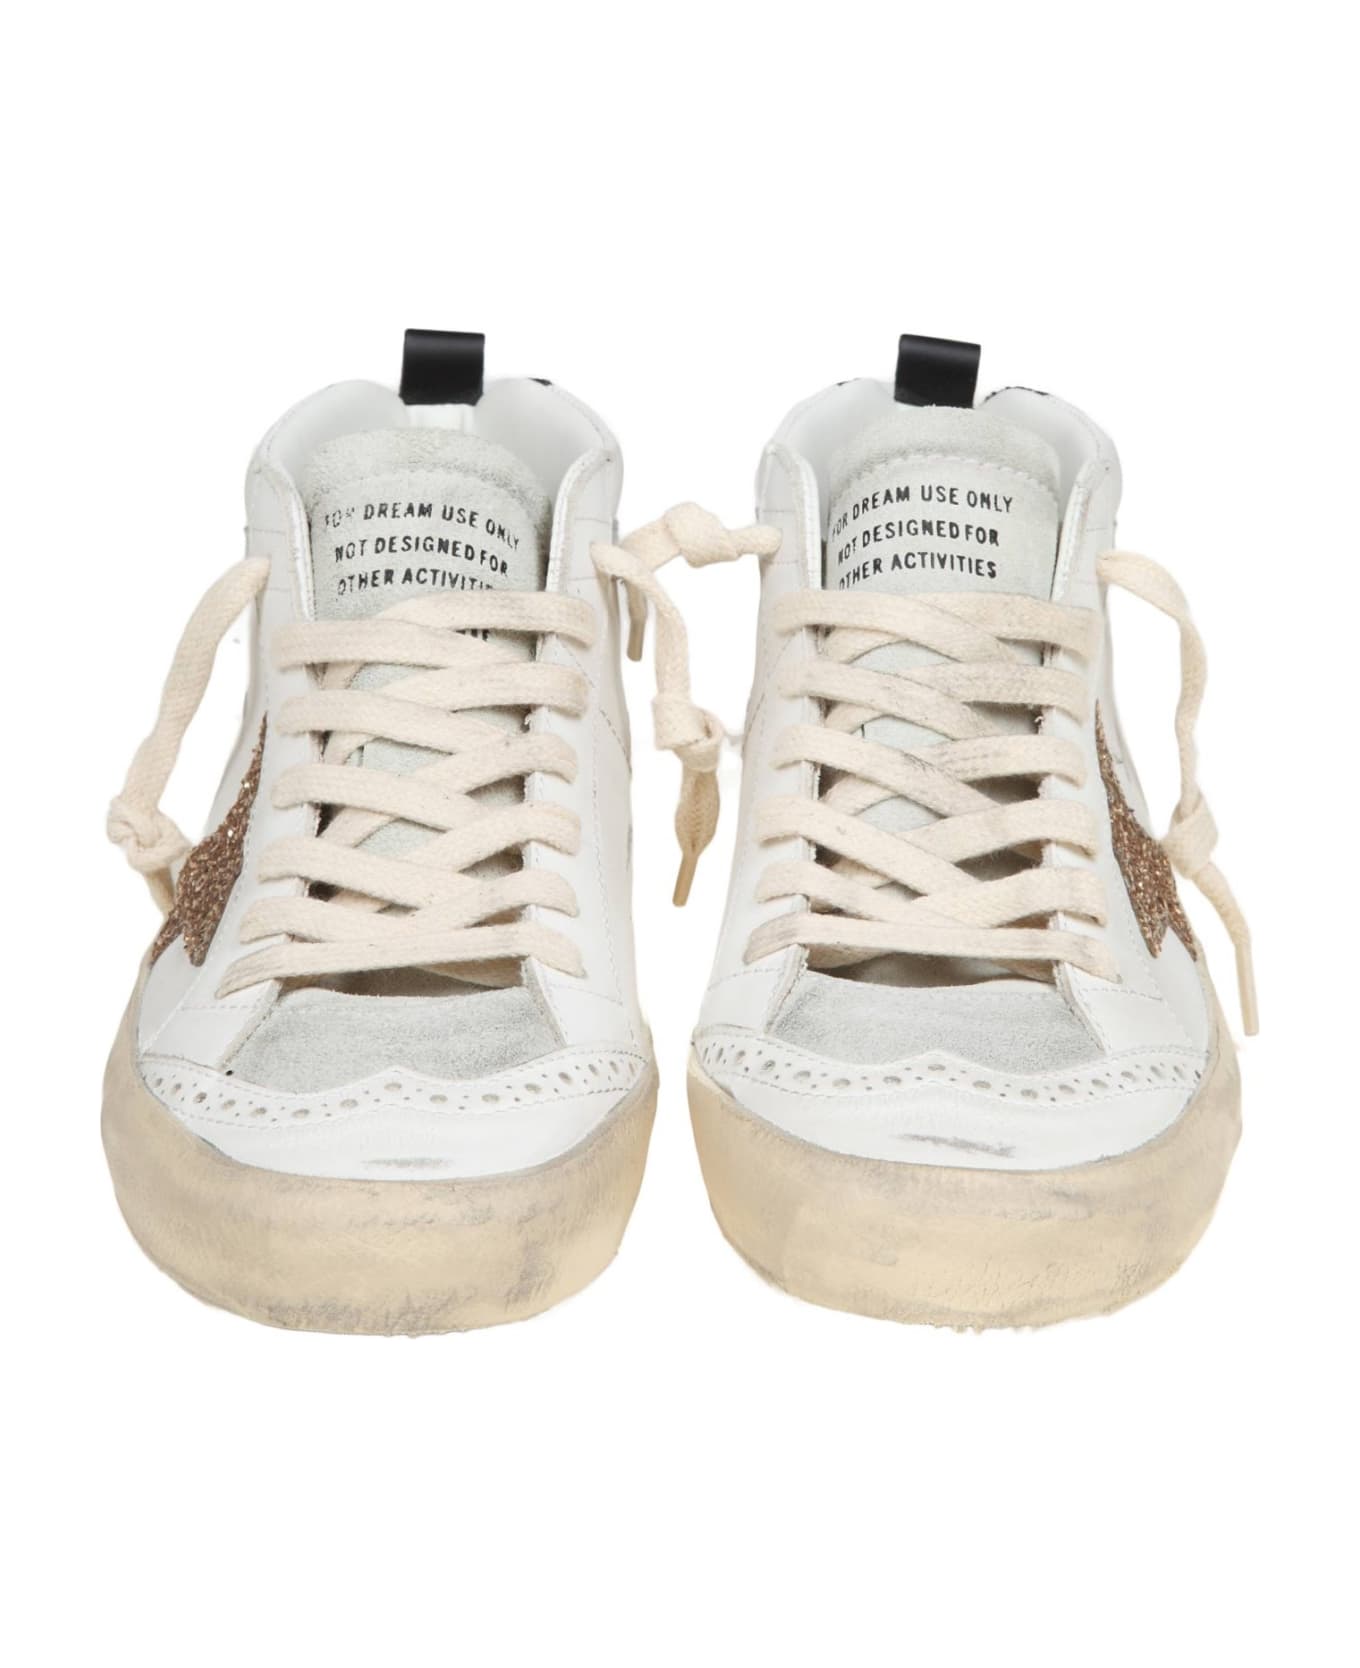 Golden Goose Mid Star In Leather And Suede With Glitter Star - White/Gold